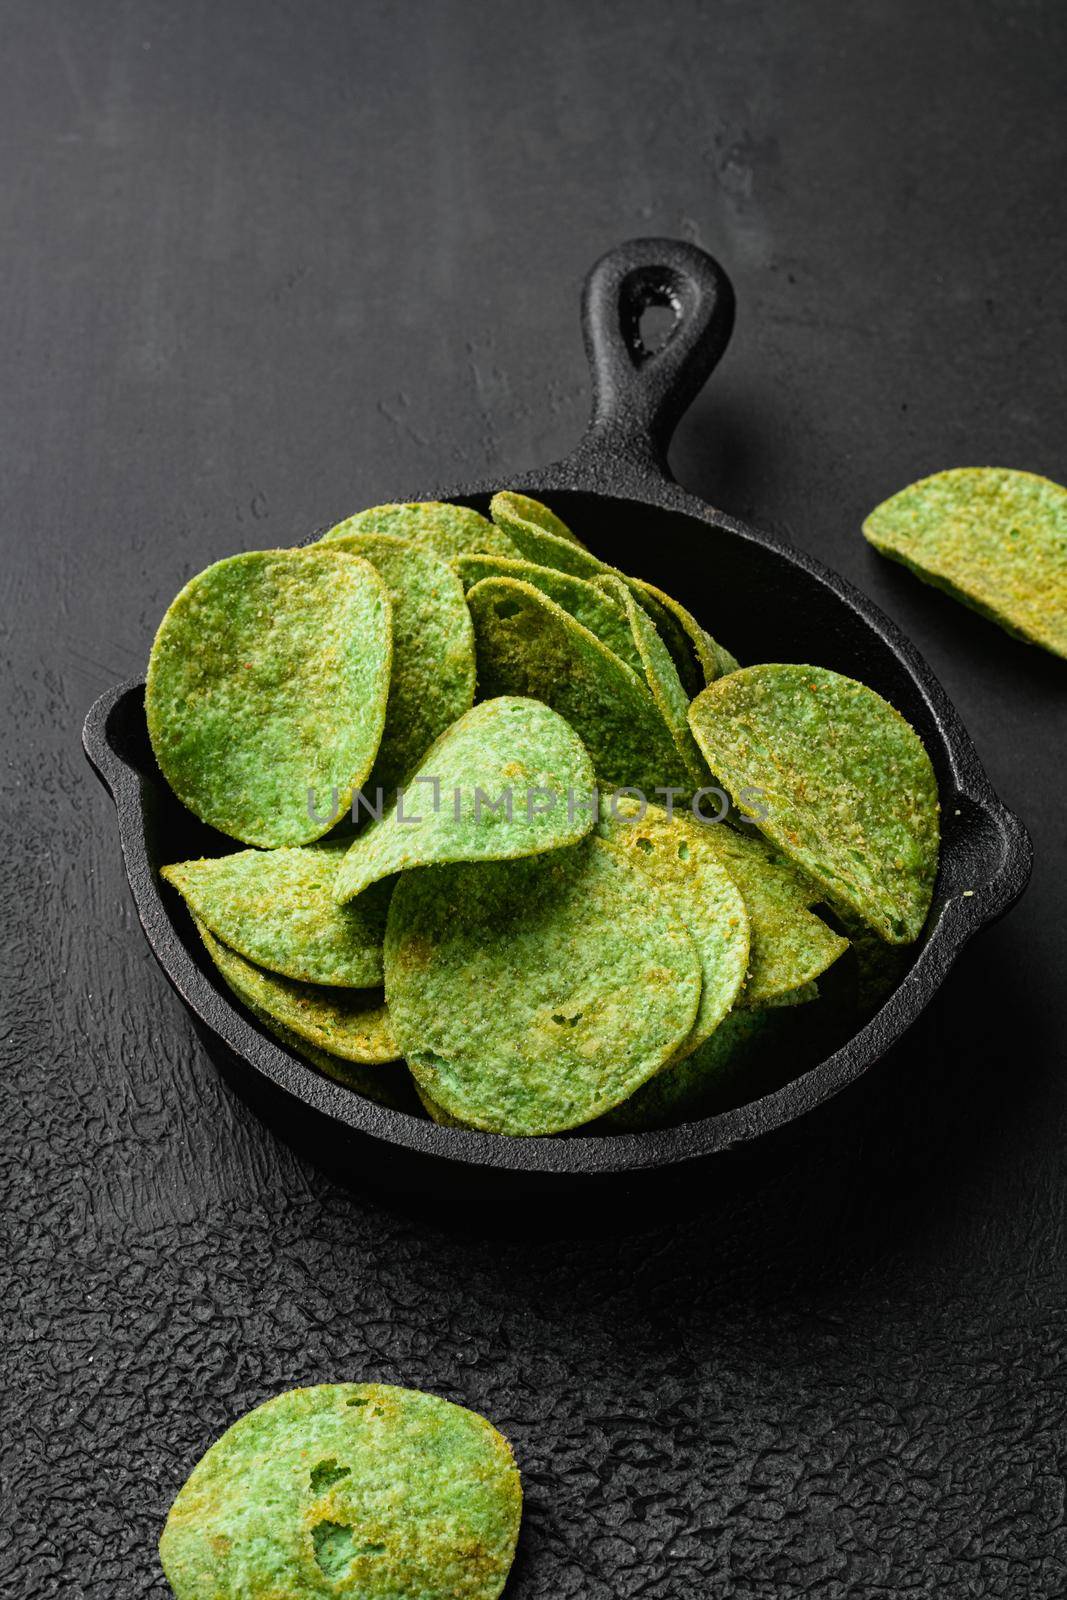 Green Chile Limon Flavored Potato Chips on black dark stone table background by Ilianesolenyi